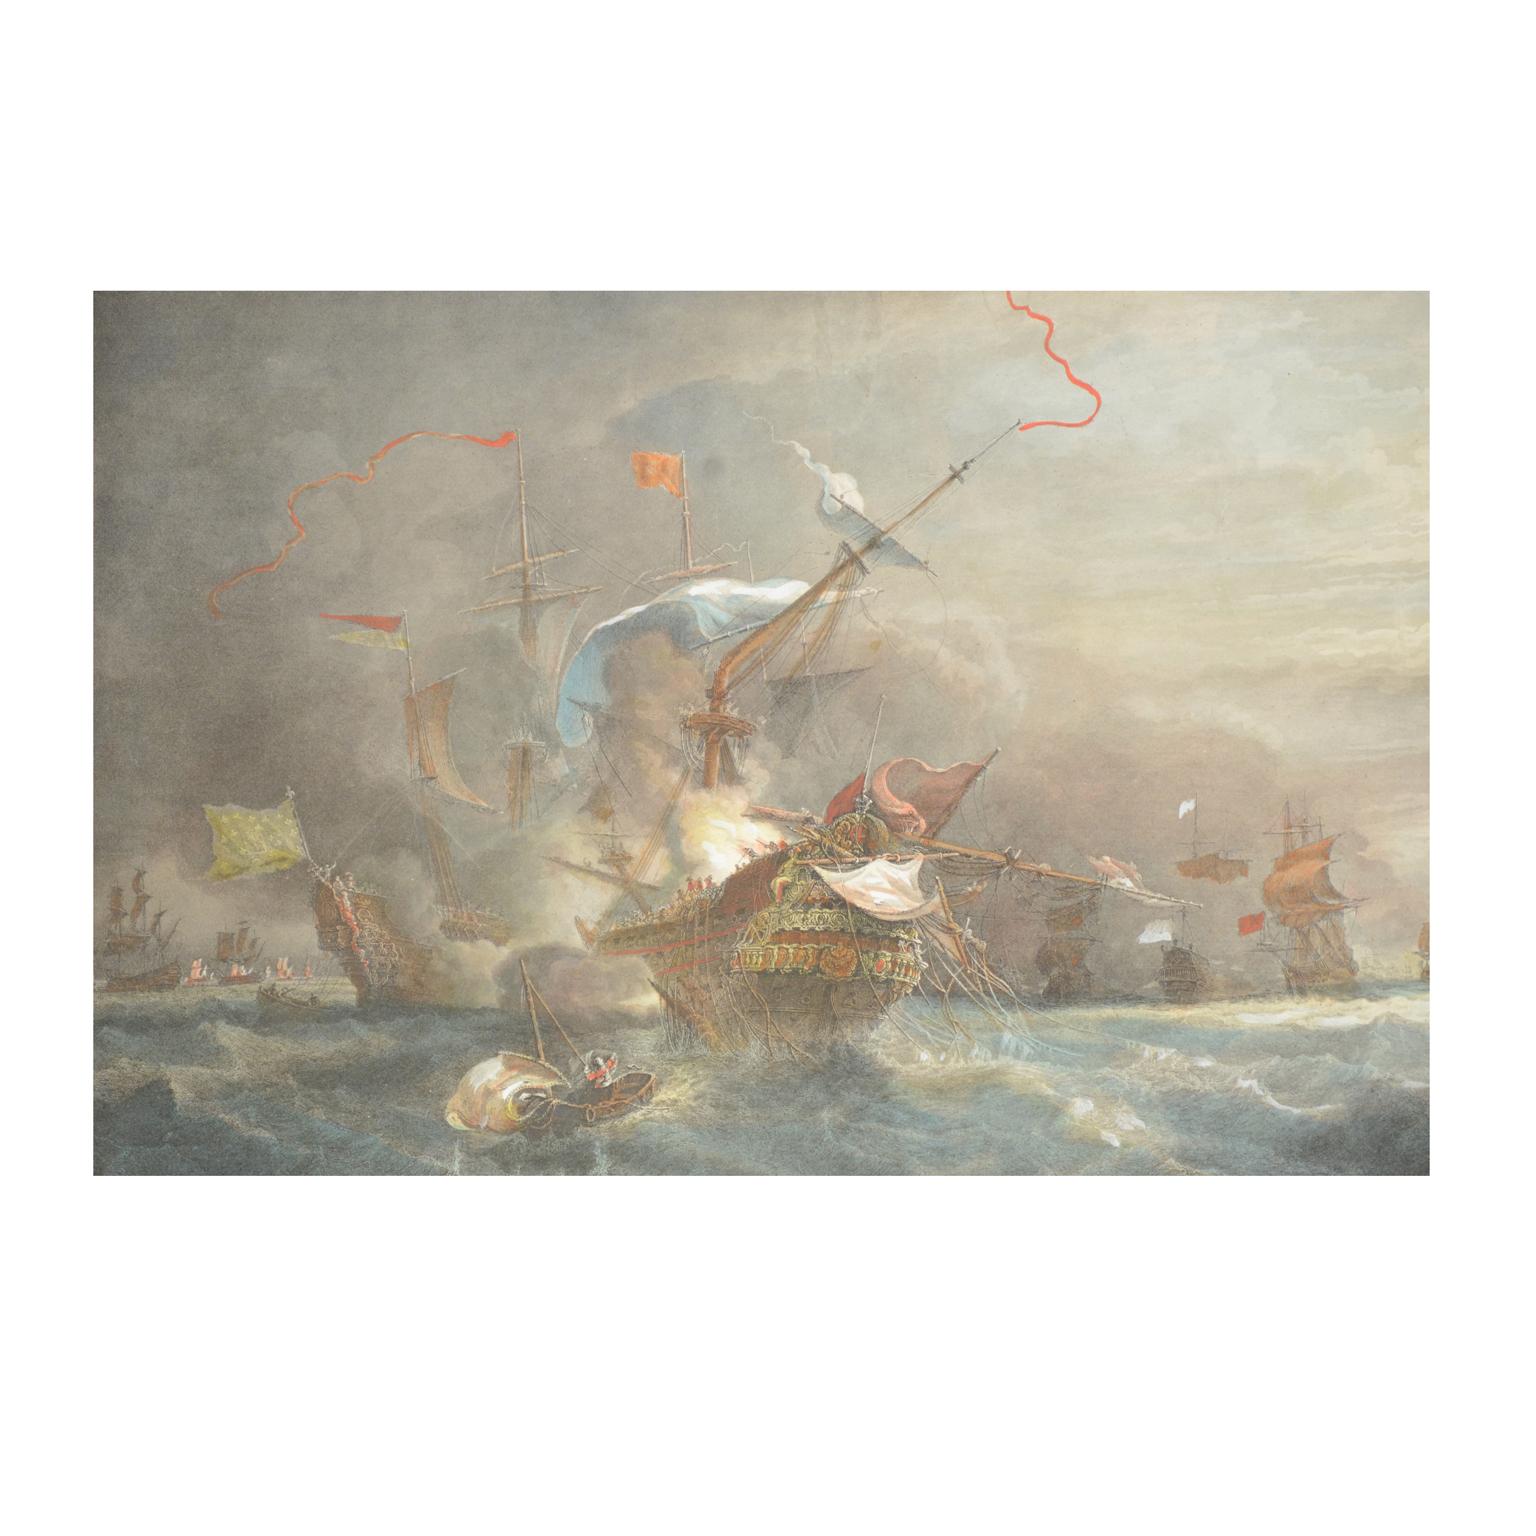 Paper Vintage Lithographic Print of Battle of Cape Lèzard, Early 1900s, Oakwood Frame For Sale